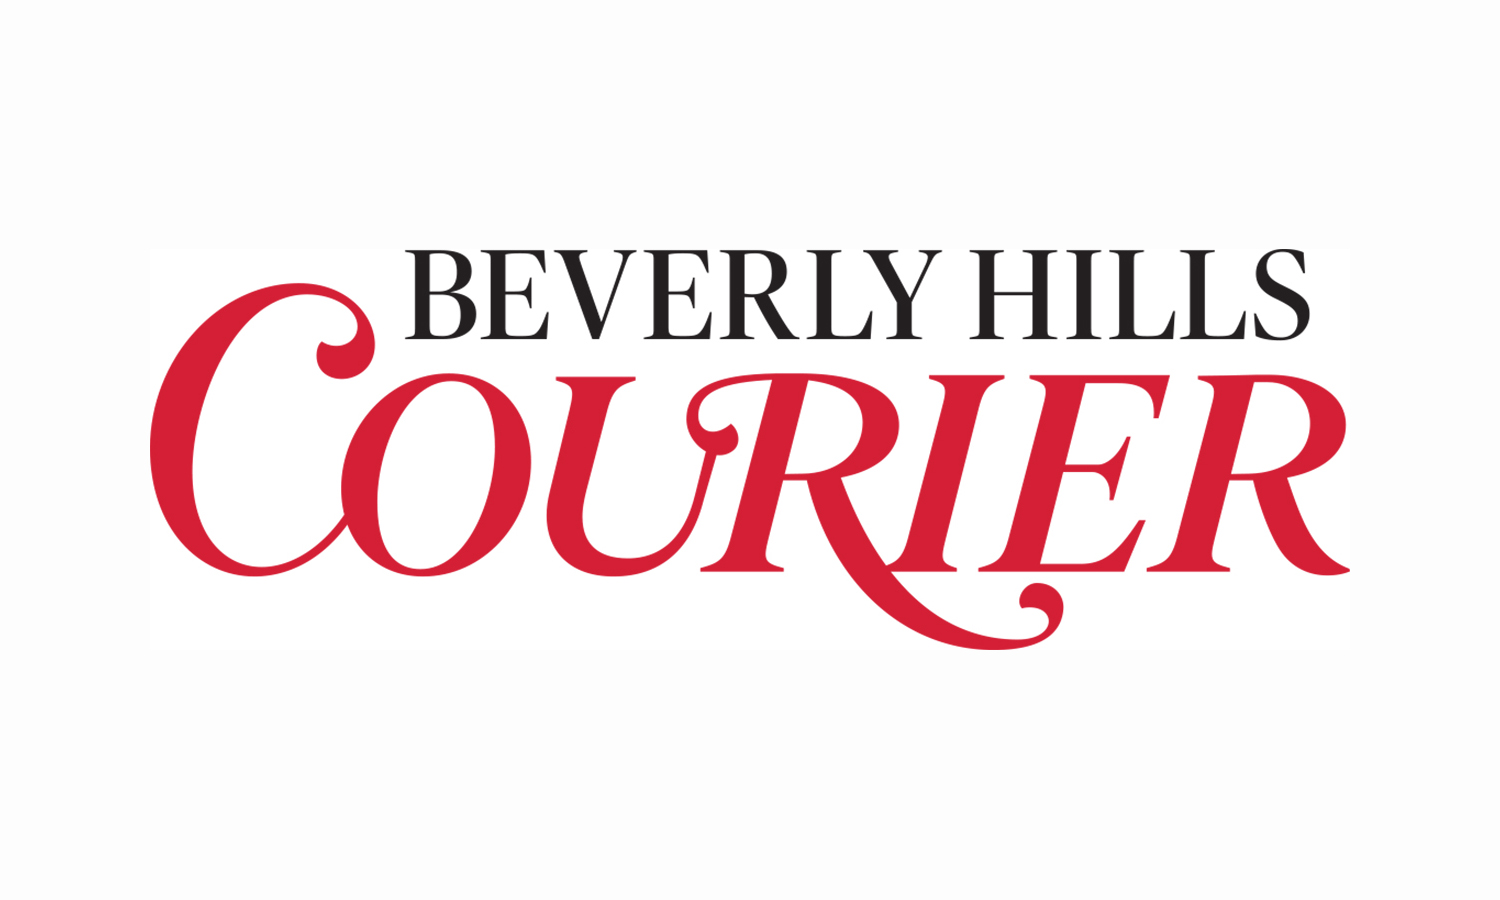 Beverly Hills Courier